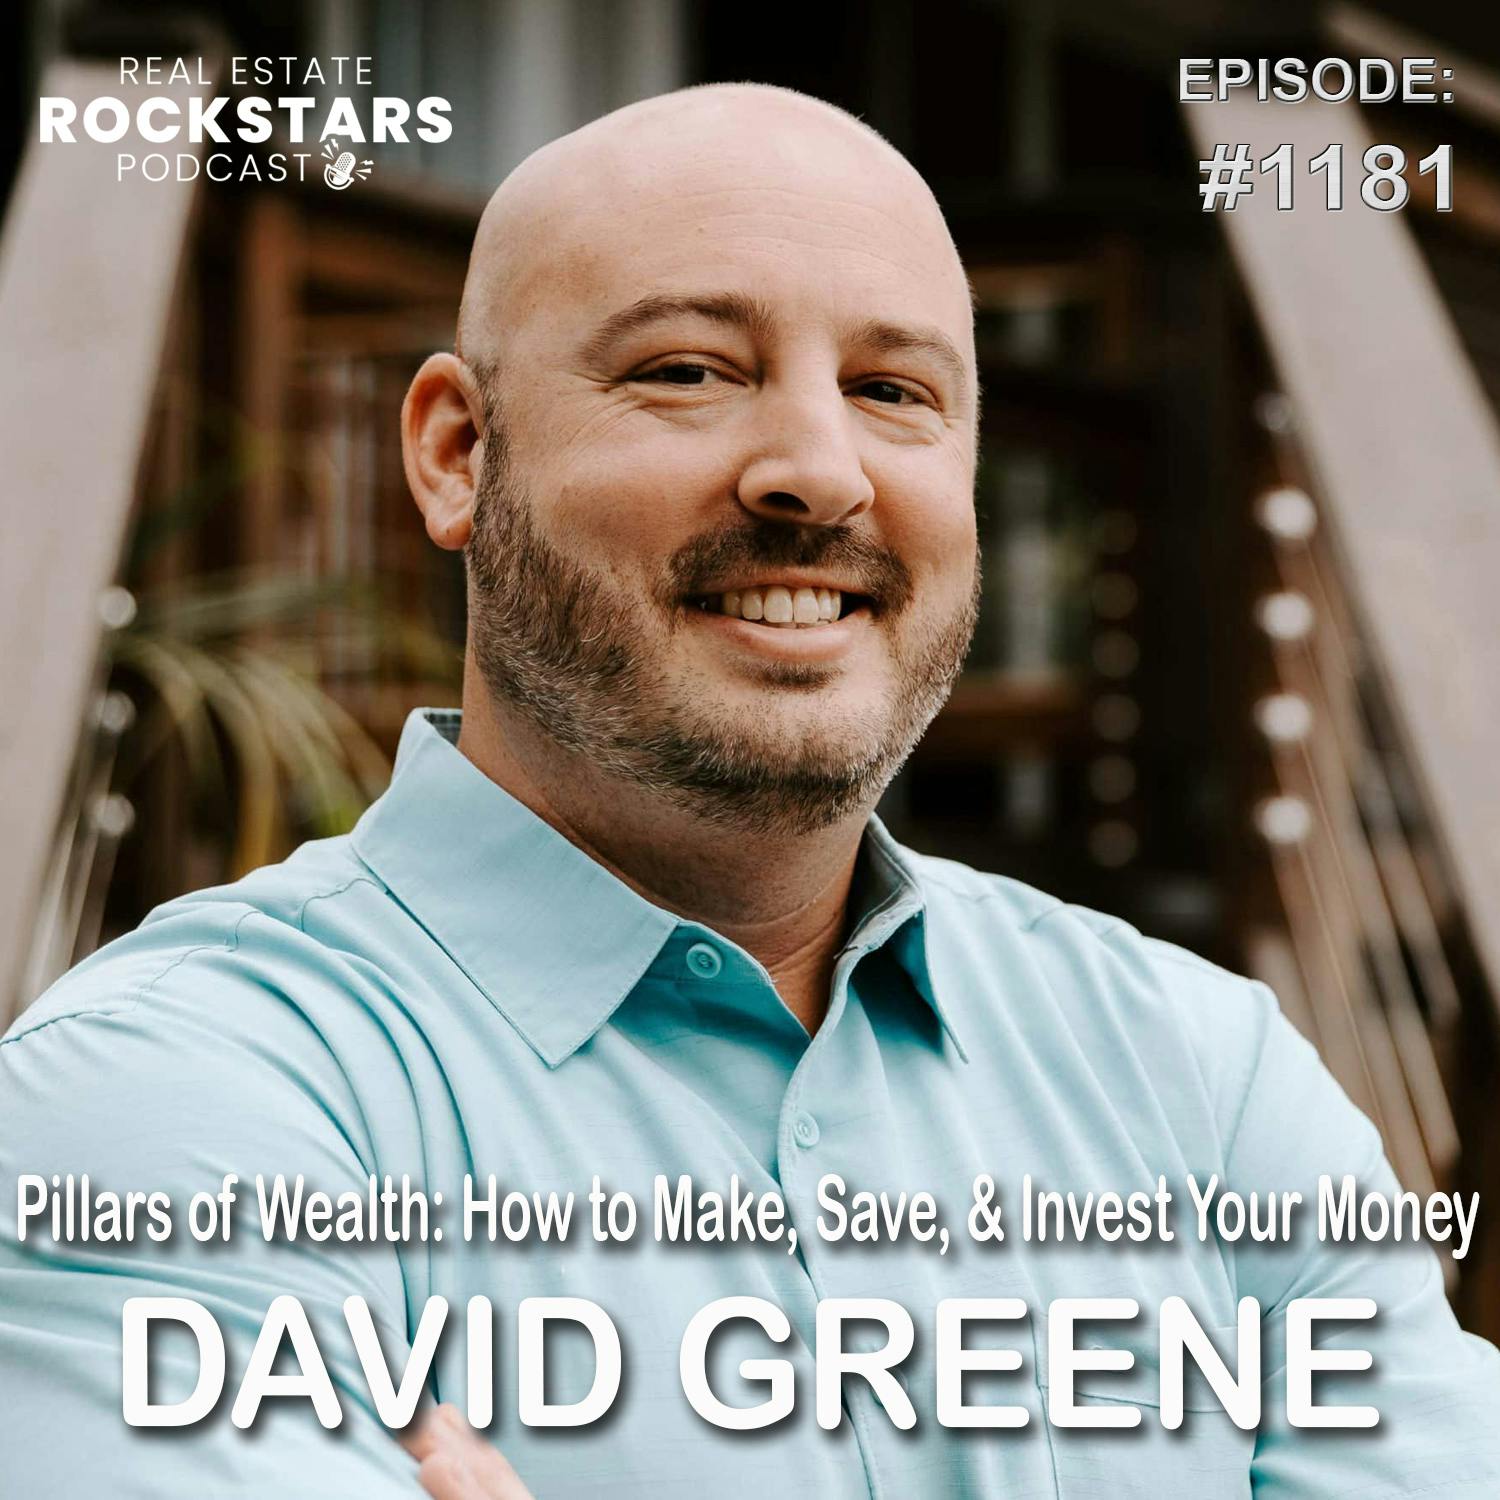 1181: David Greene’s Pillars of Wealth: How to Make, Save, & Invest Your Money